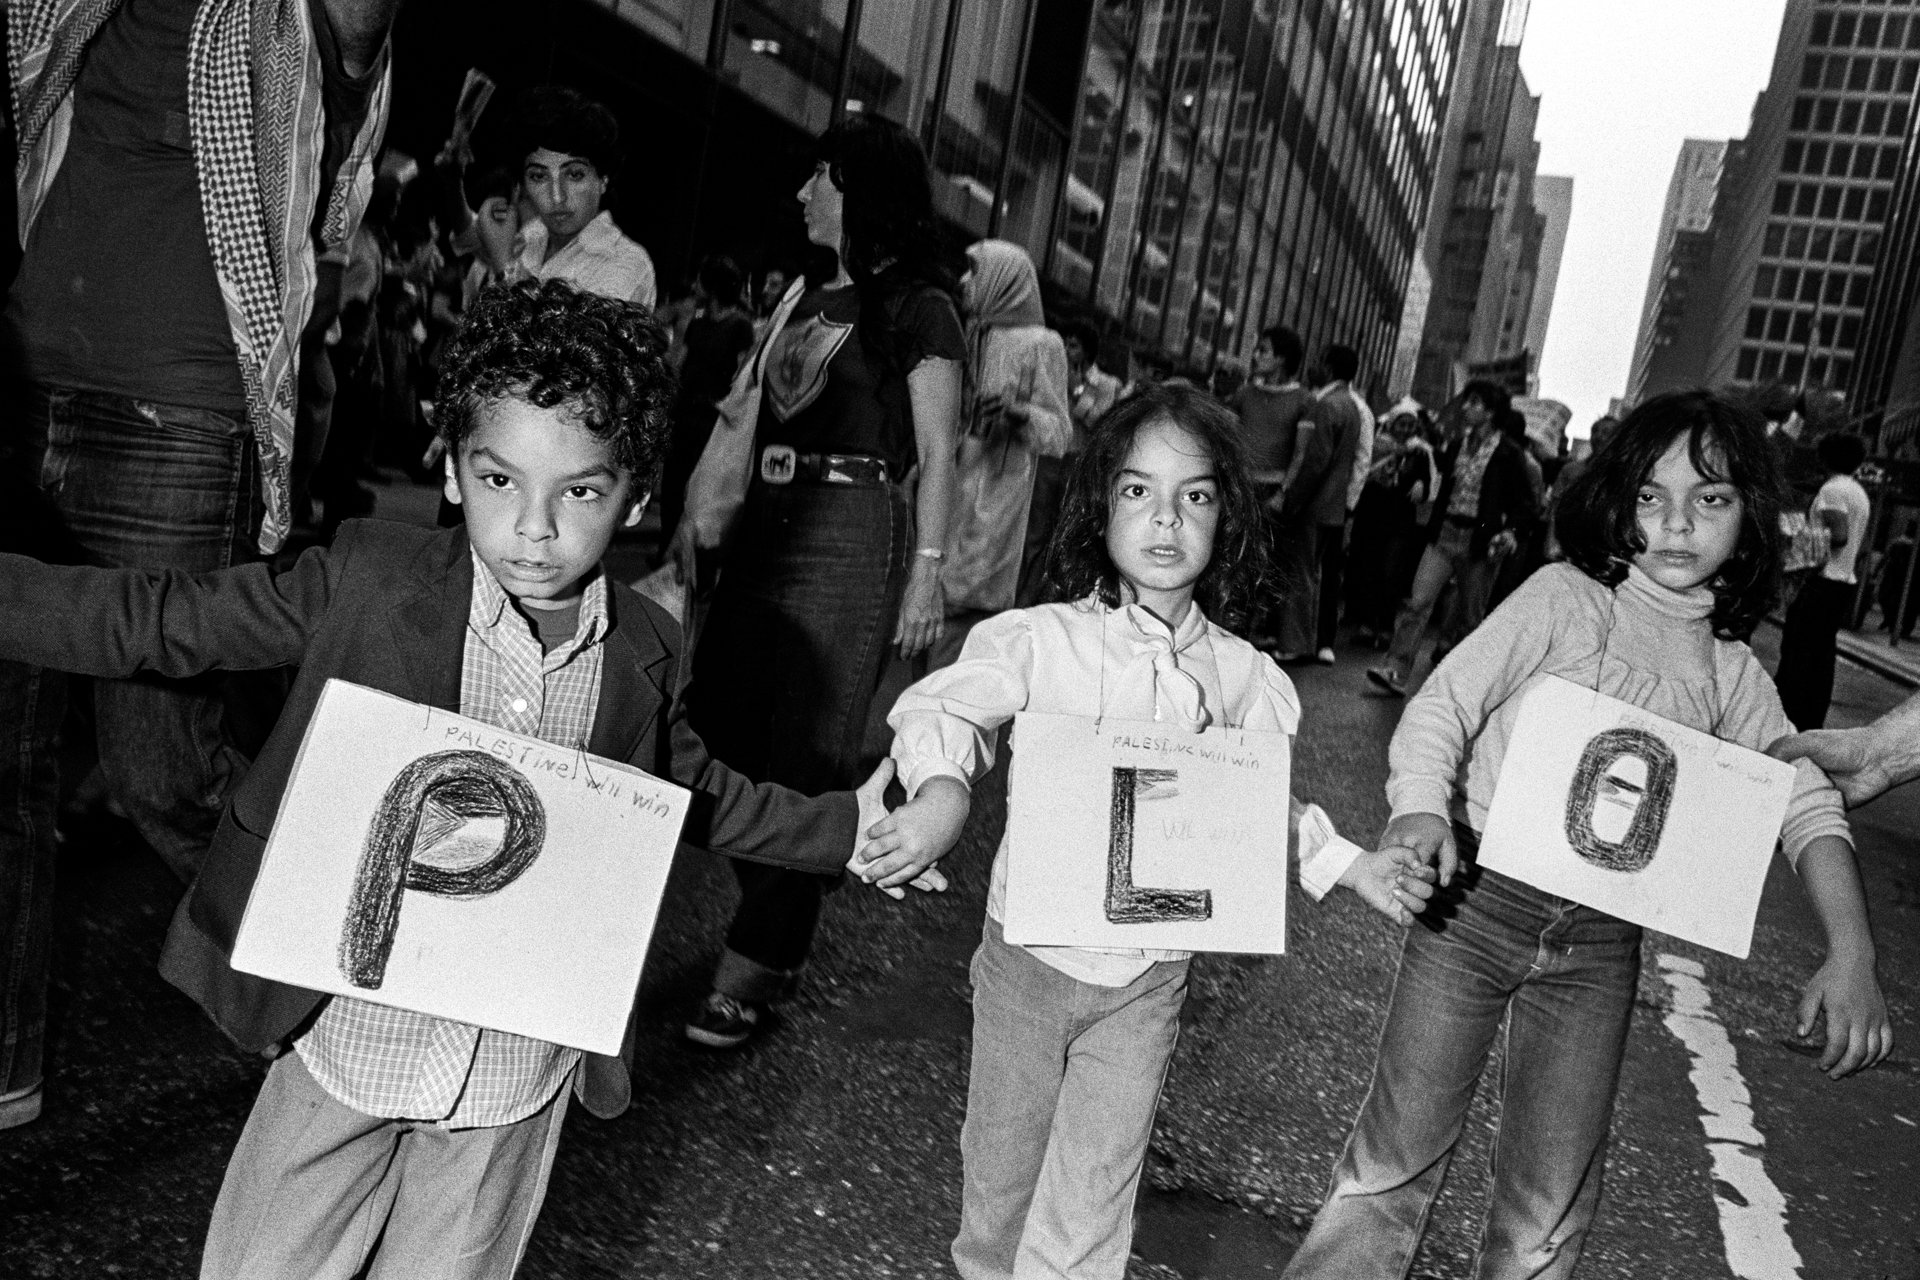 Pro PLO March, NYC, 1985